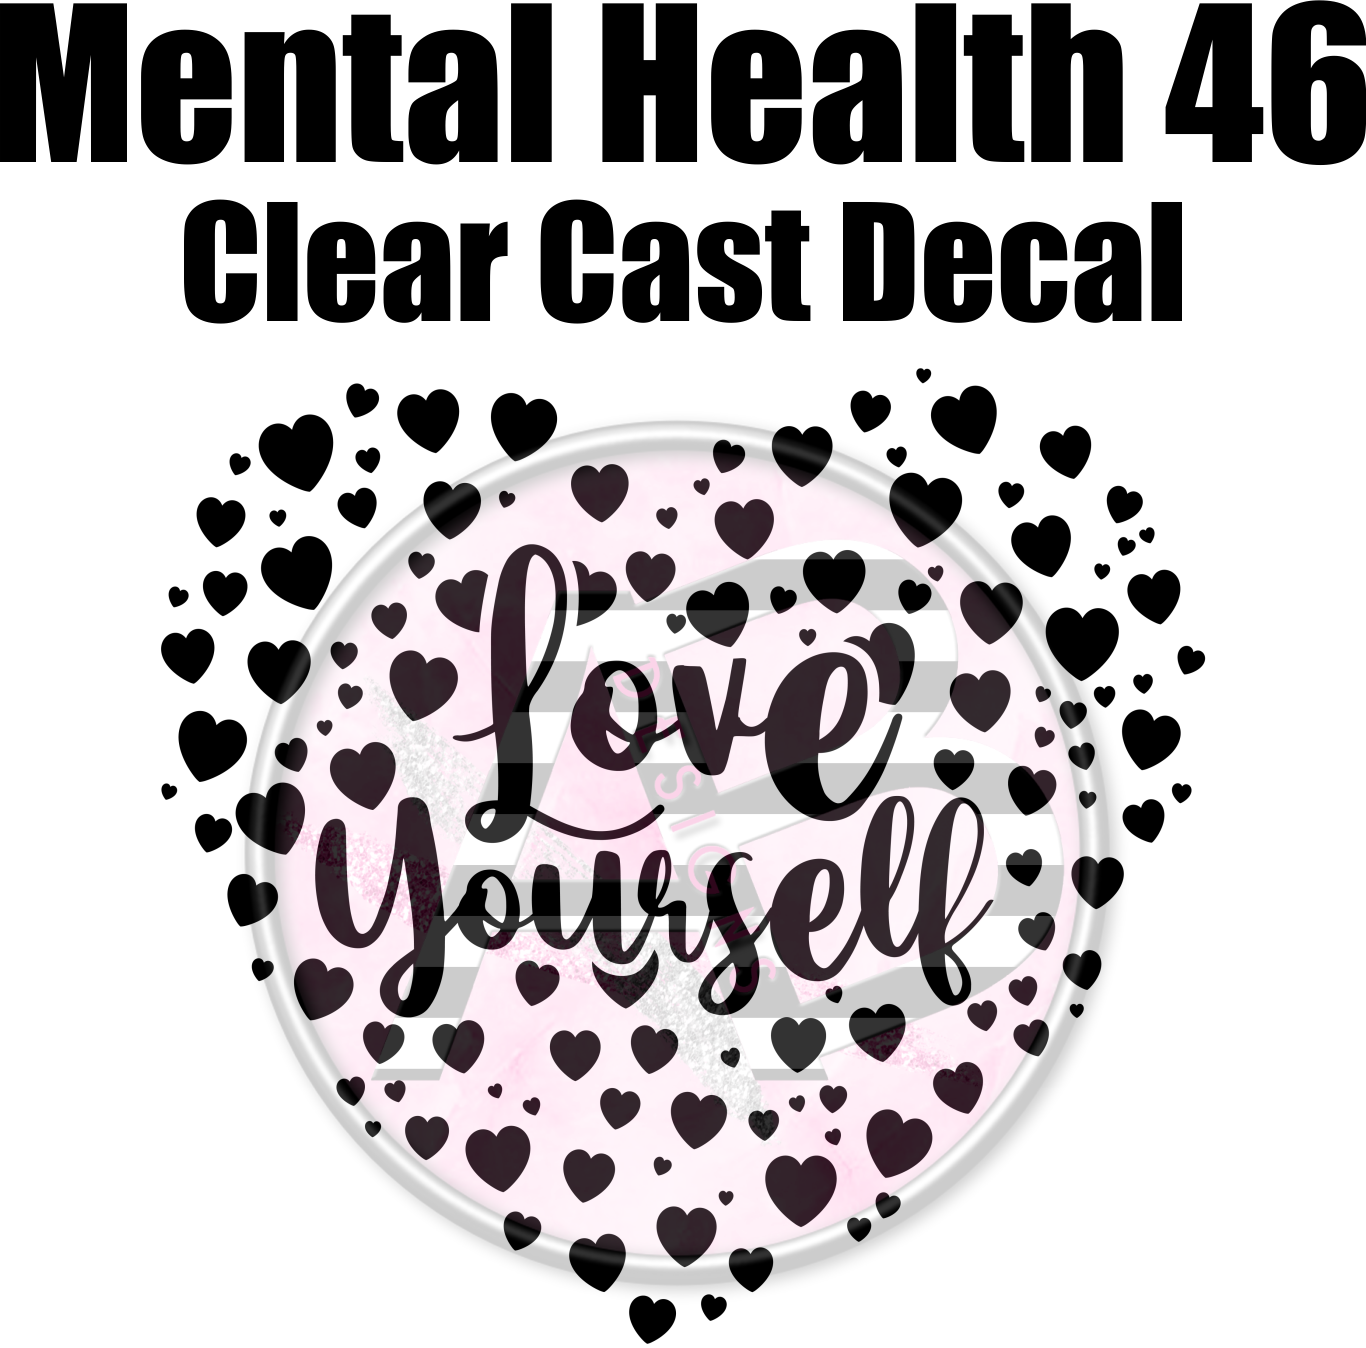 Mental Health 46 - Clear Cast Decal - 339